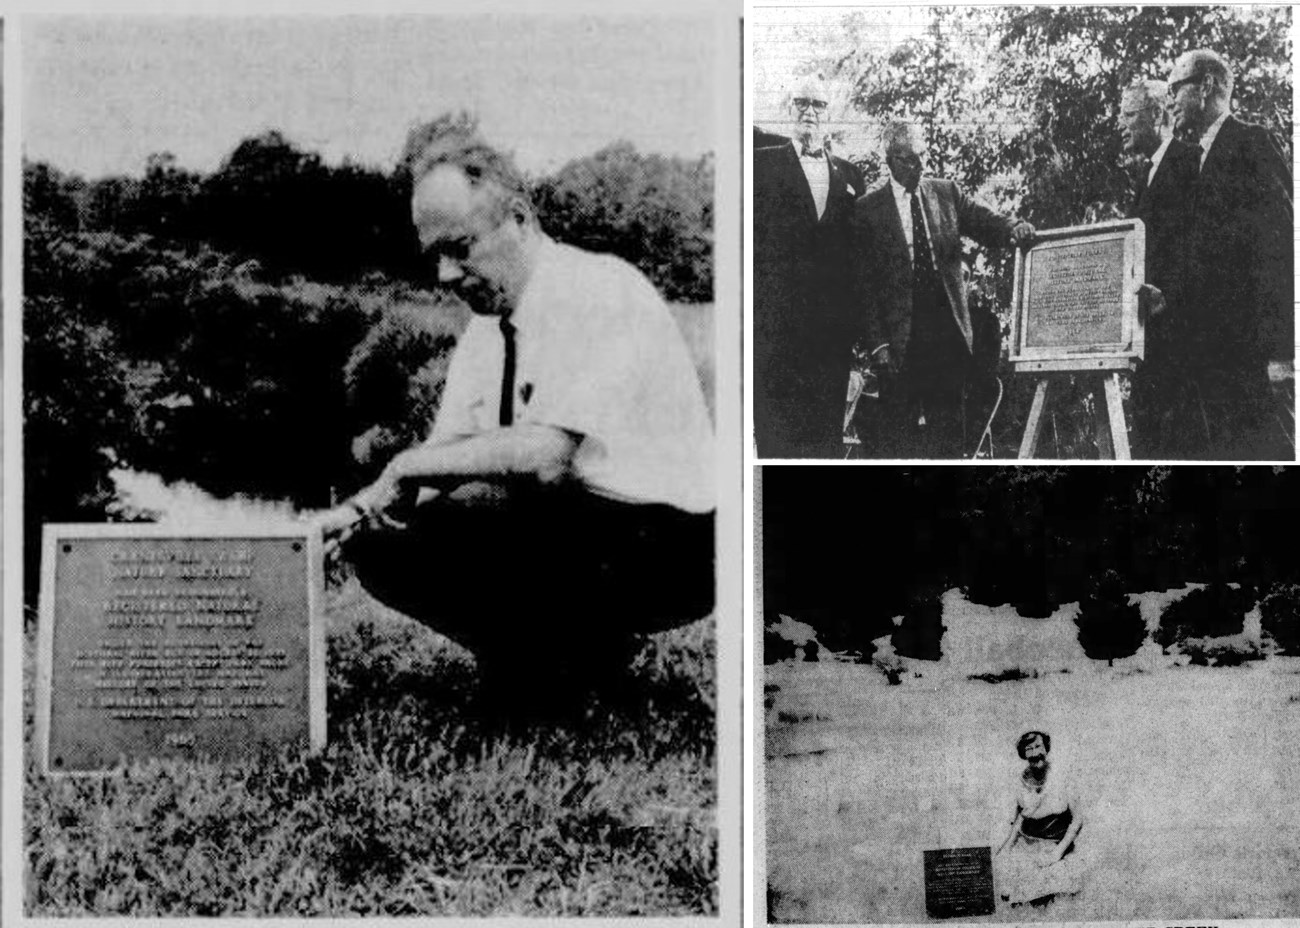 Collage of three historic photos depicting people next to plaques